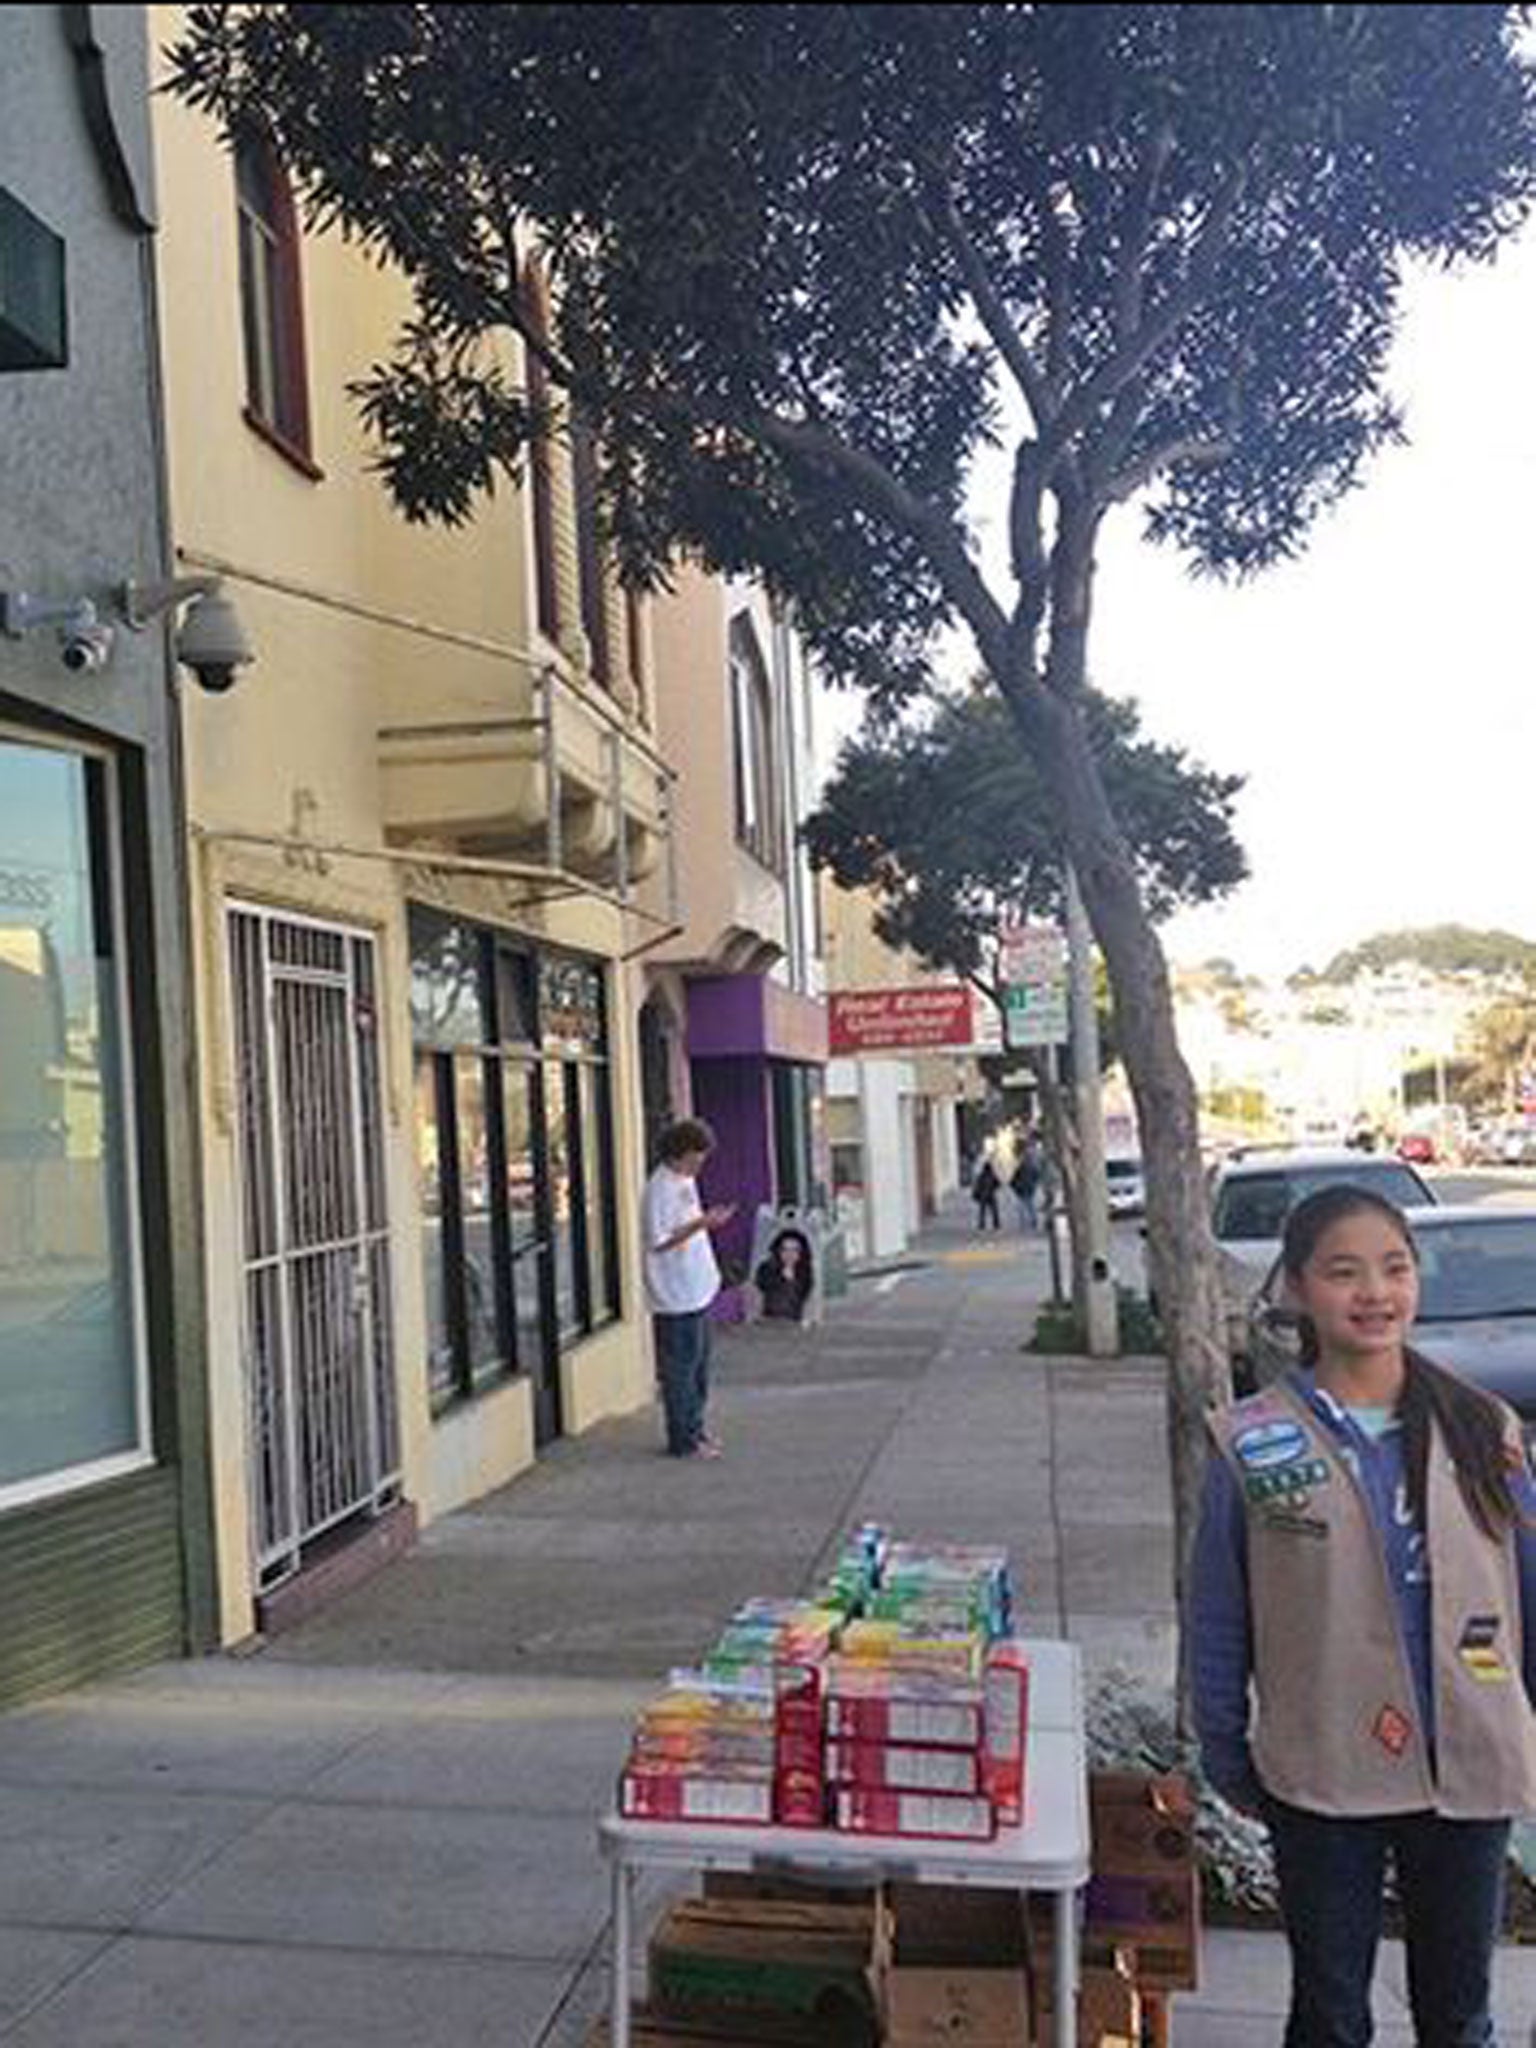 Danielle's choice of location was approved by the Girl Scouts of Northern California, who said it was not up to them to decide where the cookies could be sold